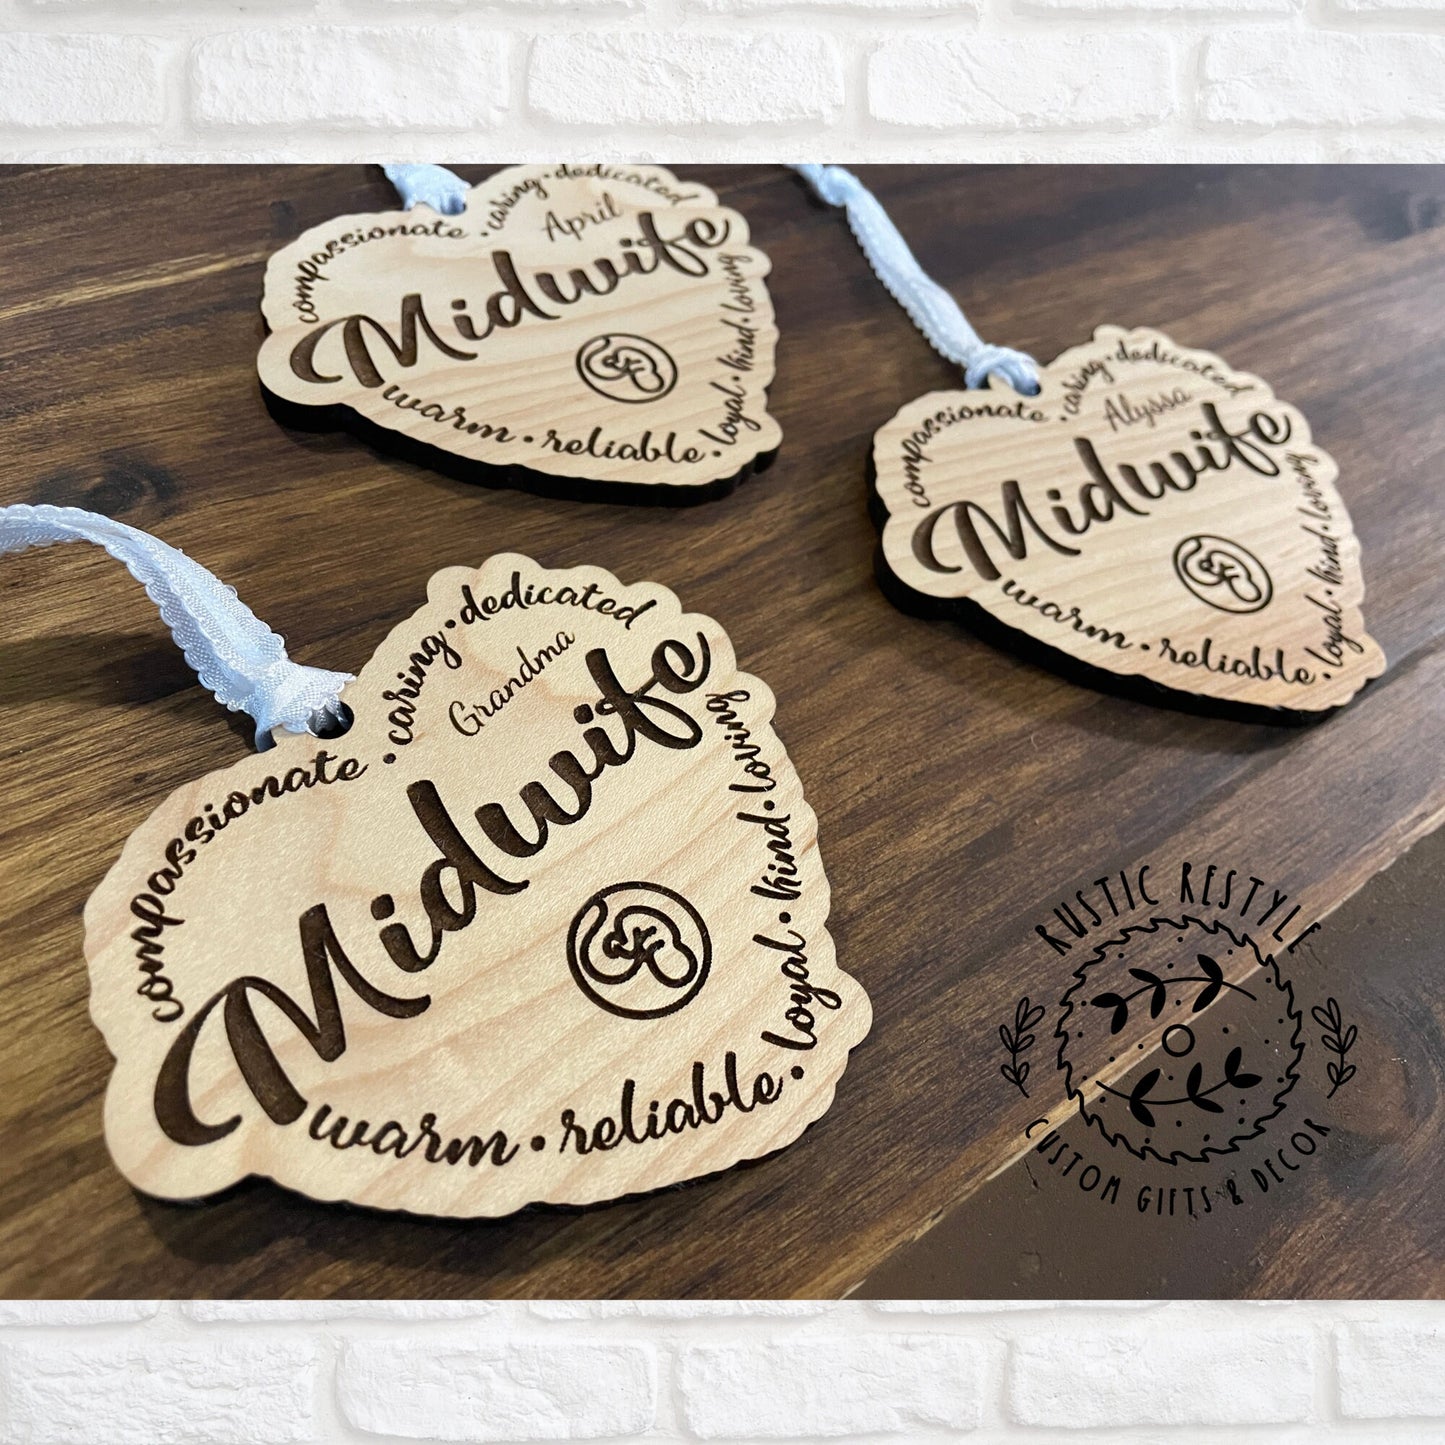 Midwife ornament, Personalized Midwife Christmas tree ornament